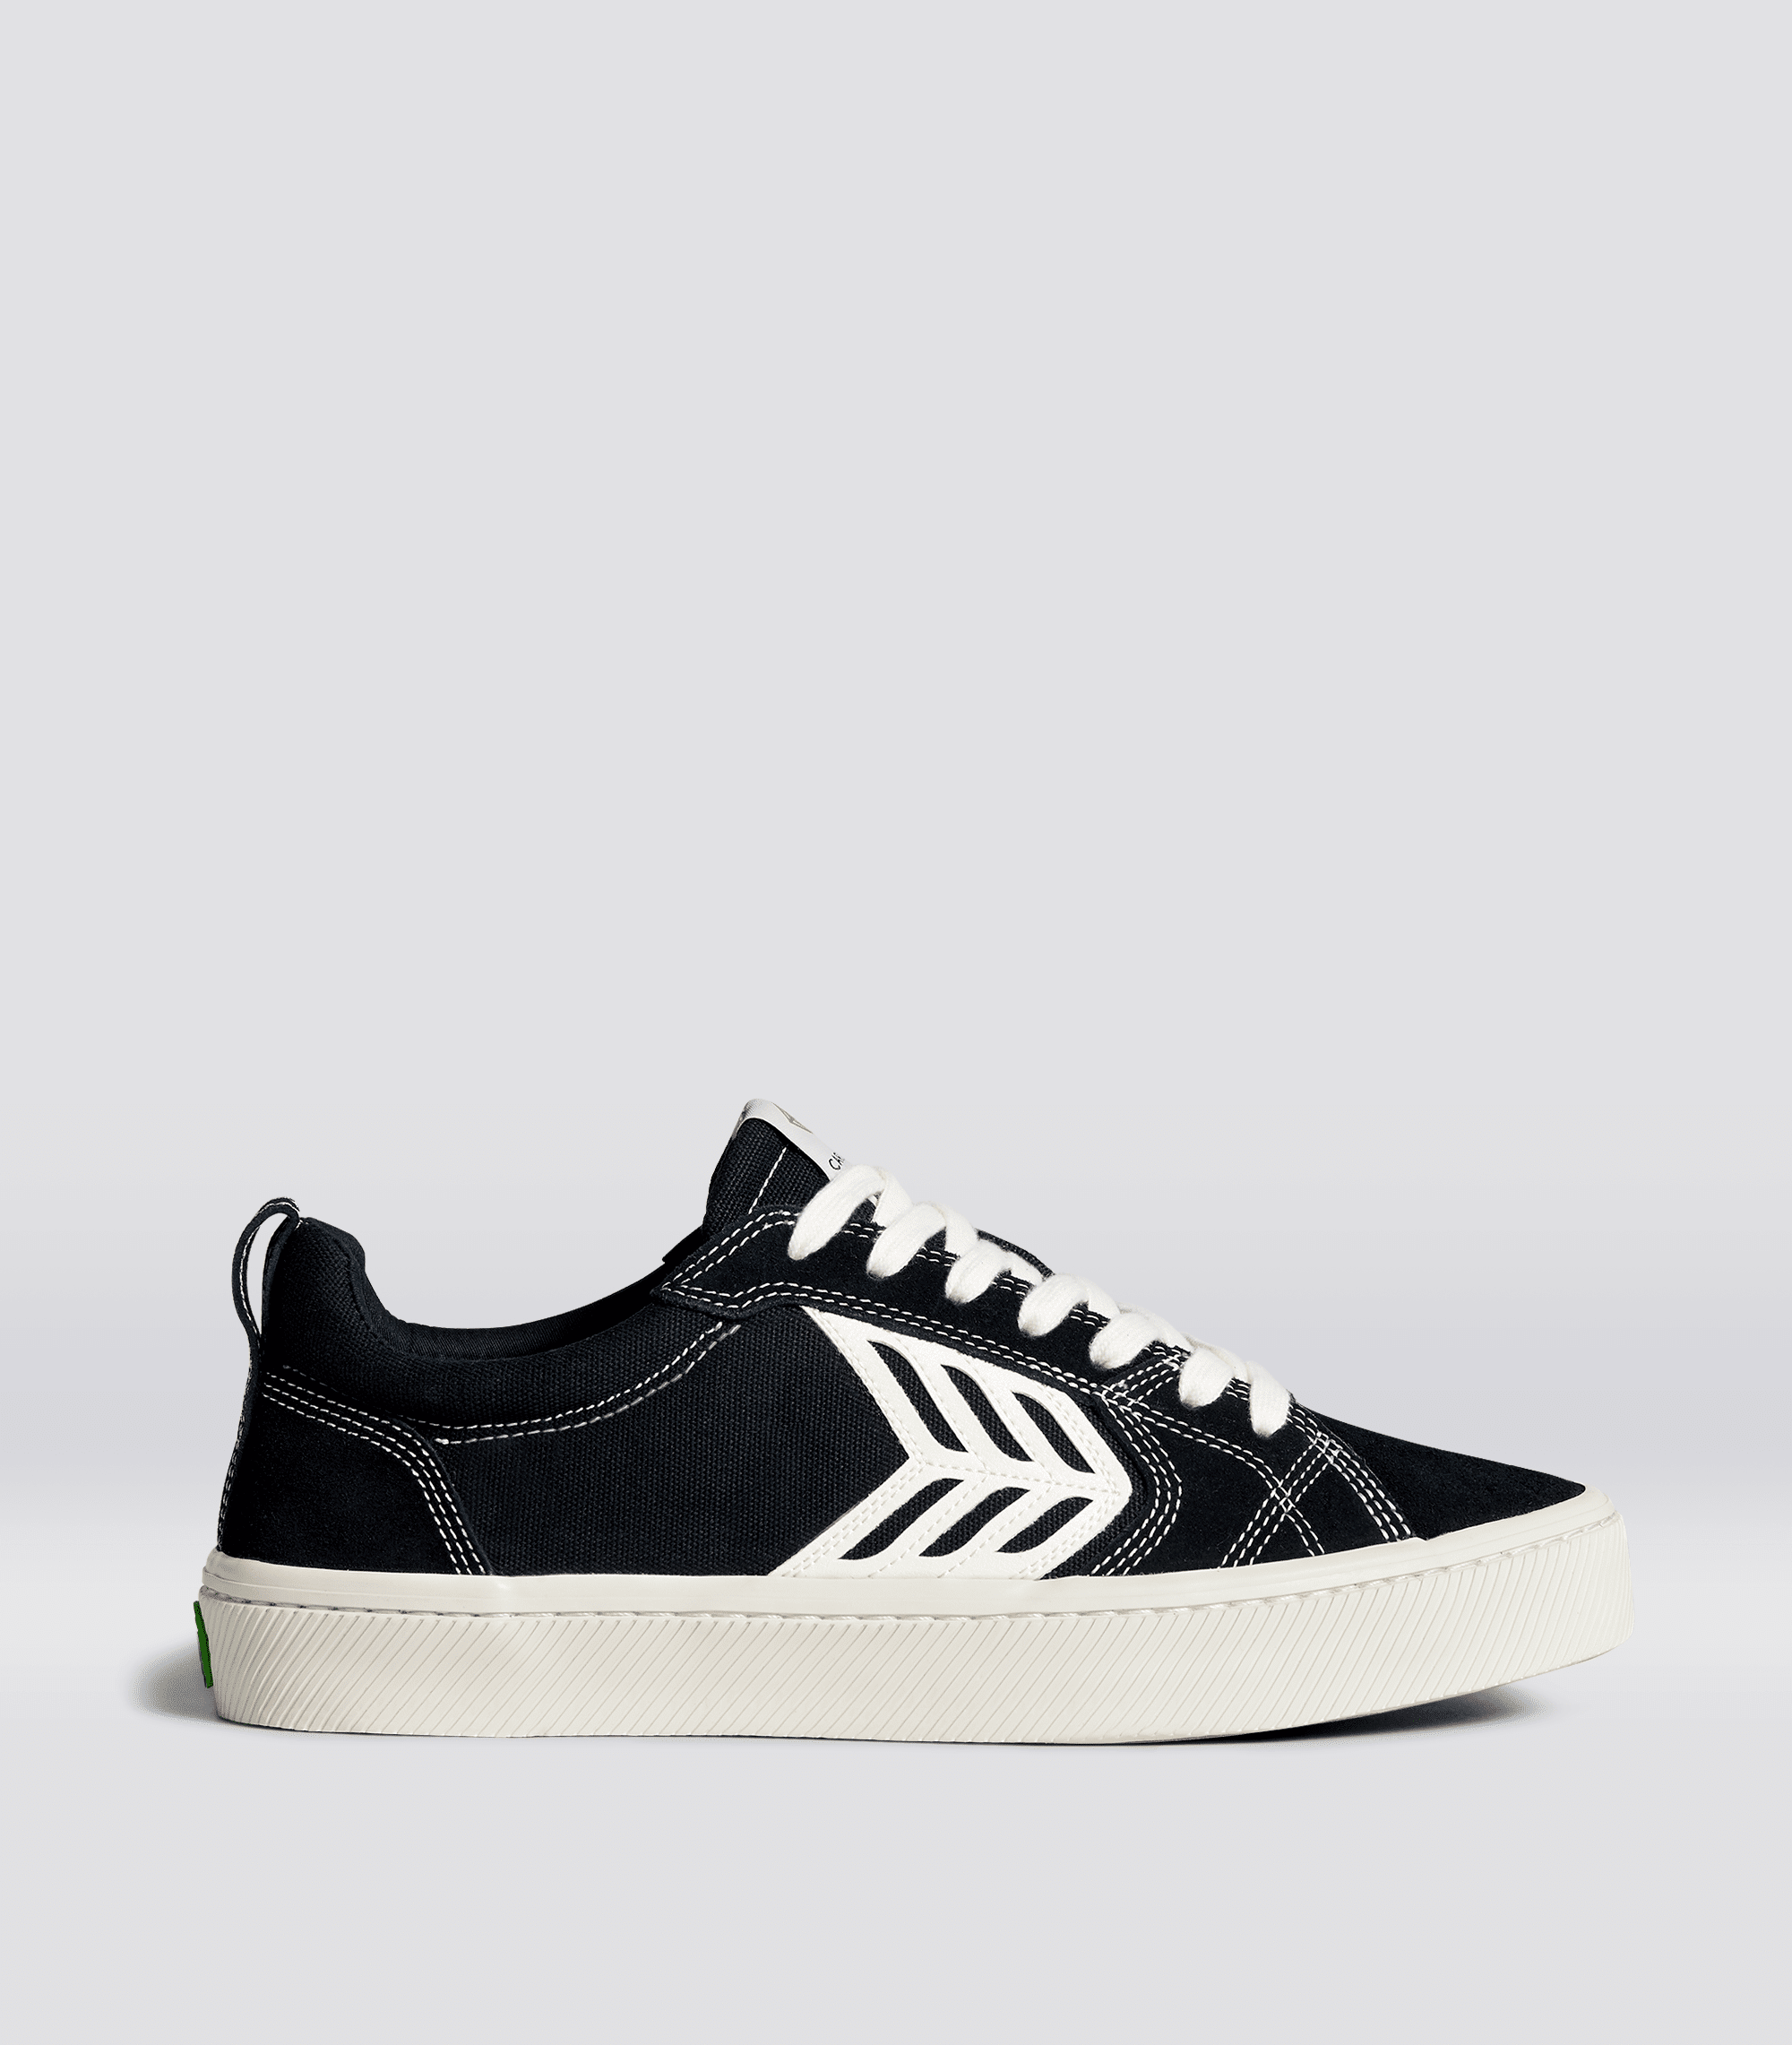 Cariuma CATIBA PRO Low Black Suede and Canvas Contrast Thread Ivory Logo Sneaker Women Right Black Contrast/Ivory size:8.5